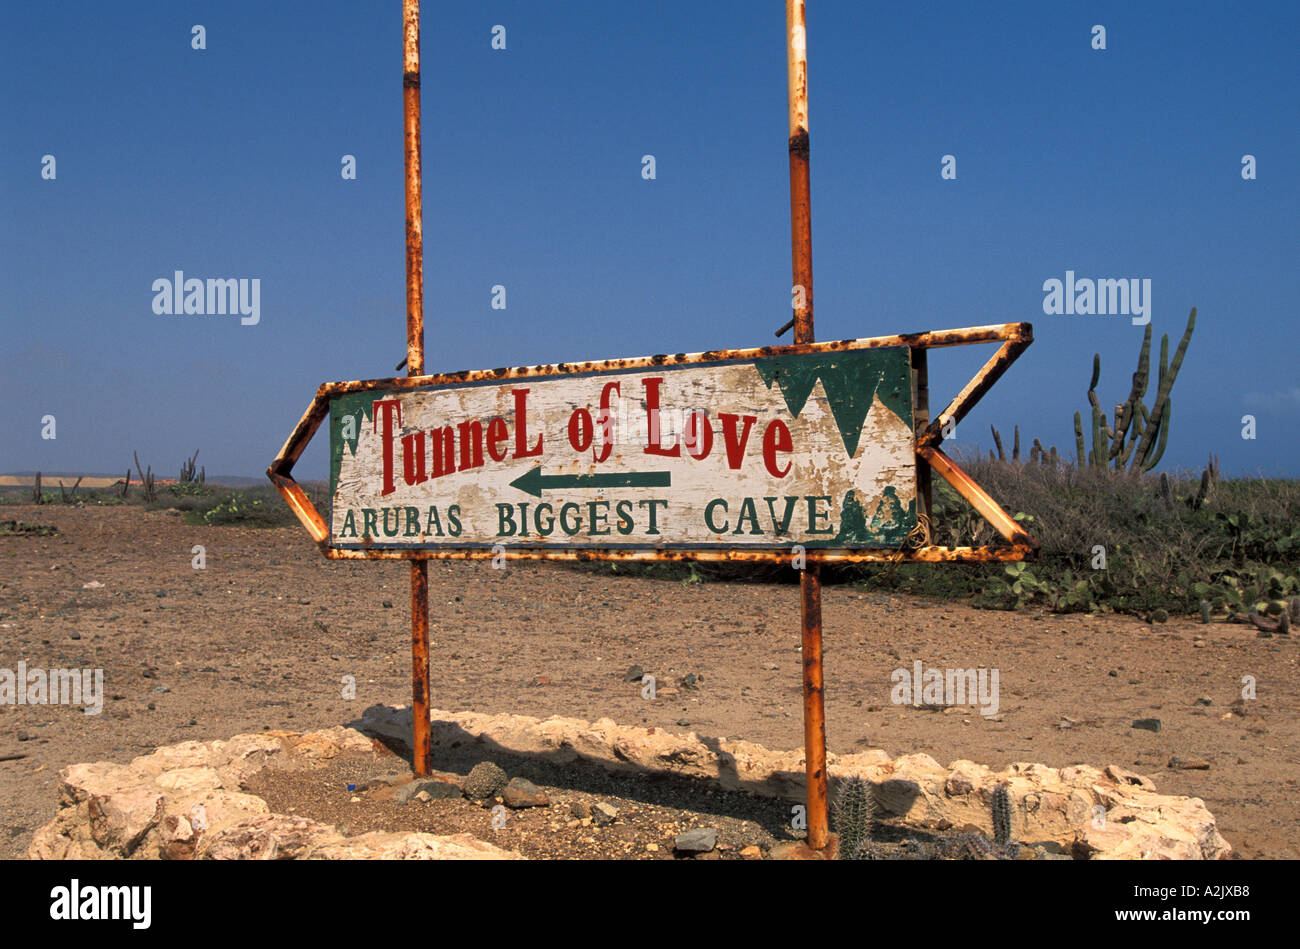 Aruba Sign Leading to Tunnel of Love Stock Photo